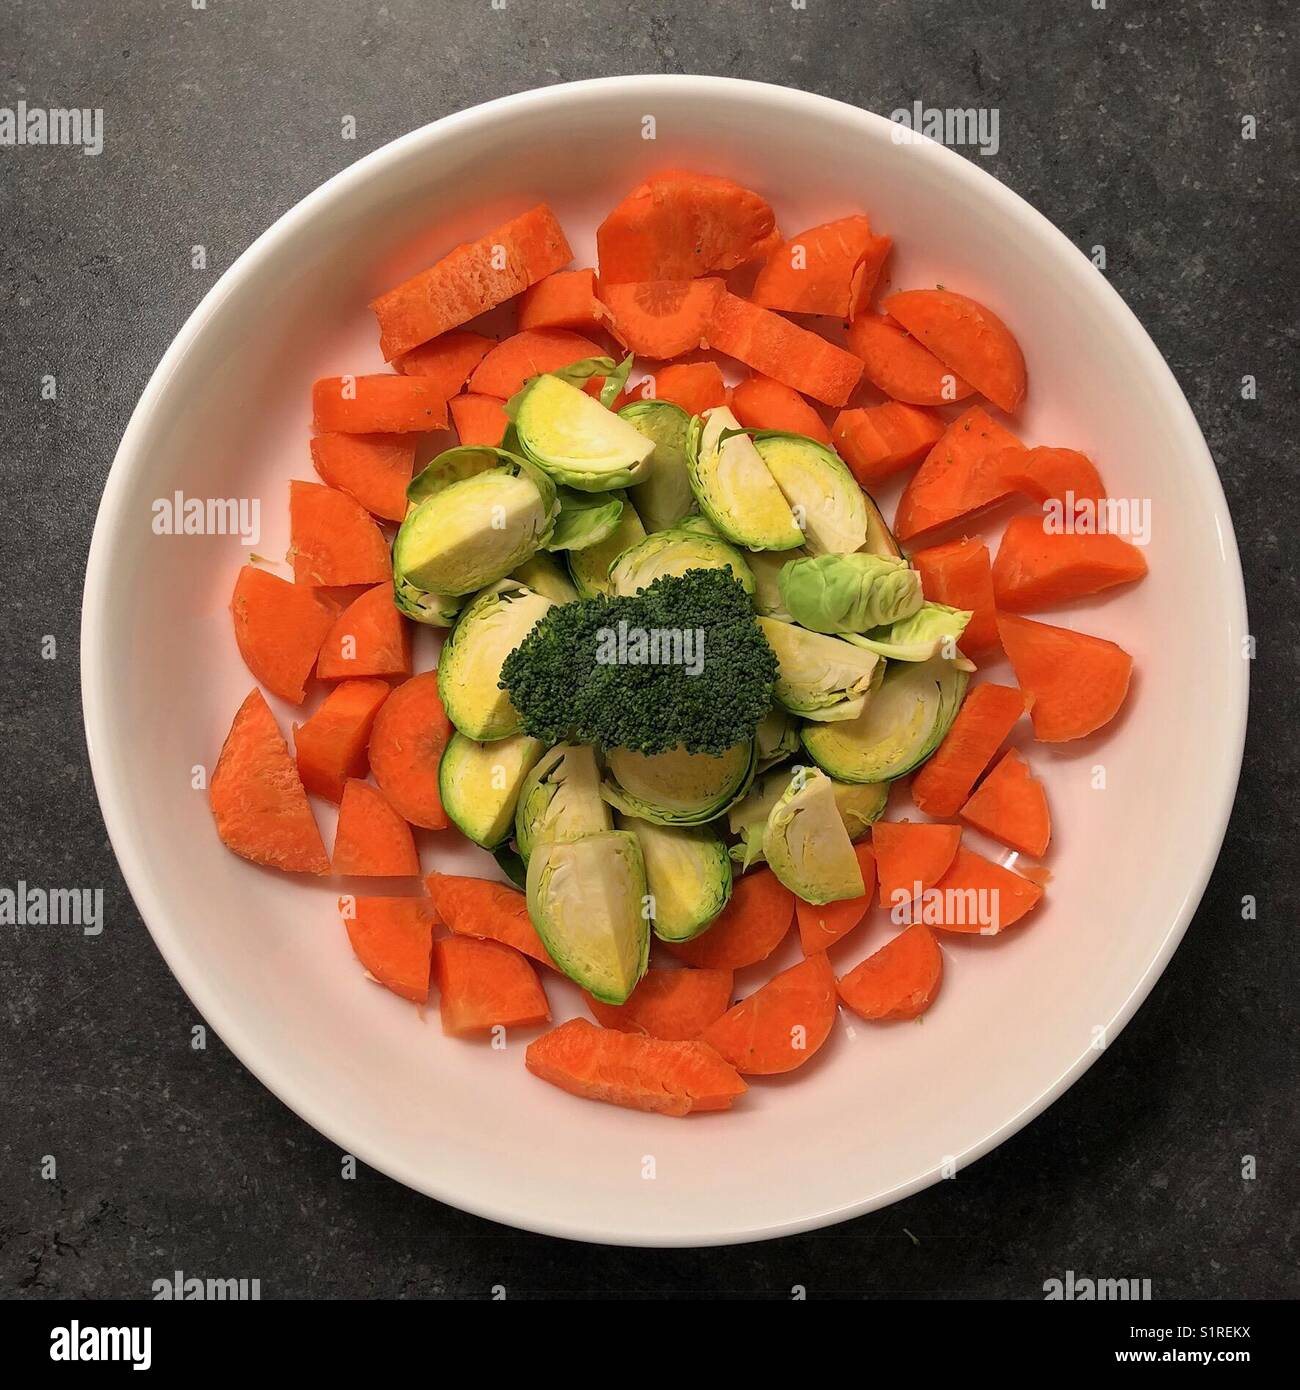 Fresh, chopped vegetables - carrots and greens on a round, white plate Stock Photo